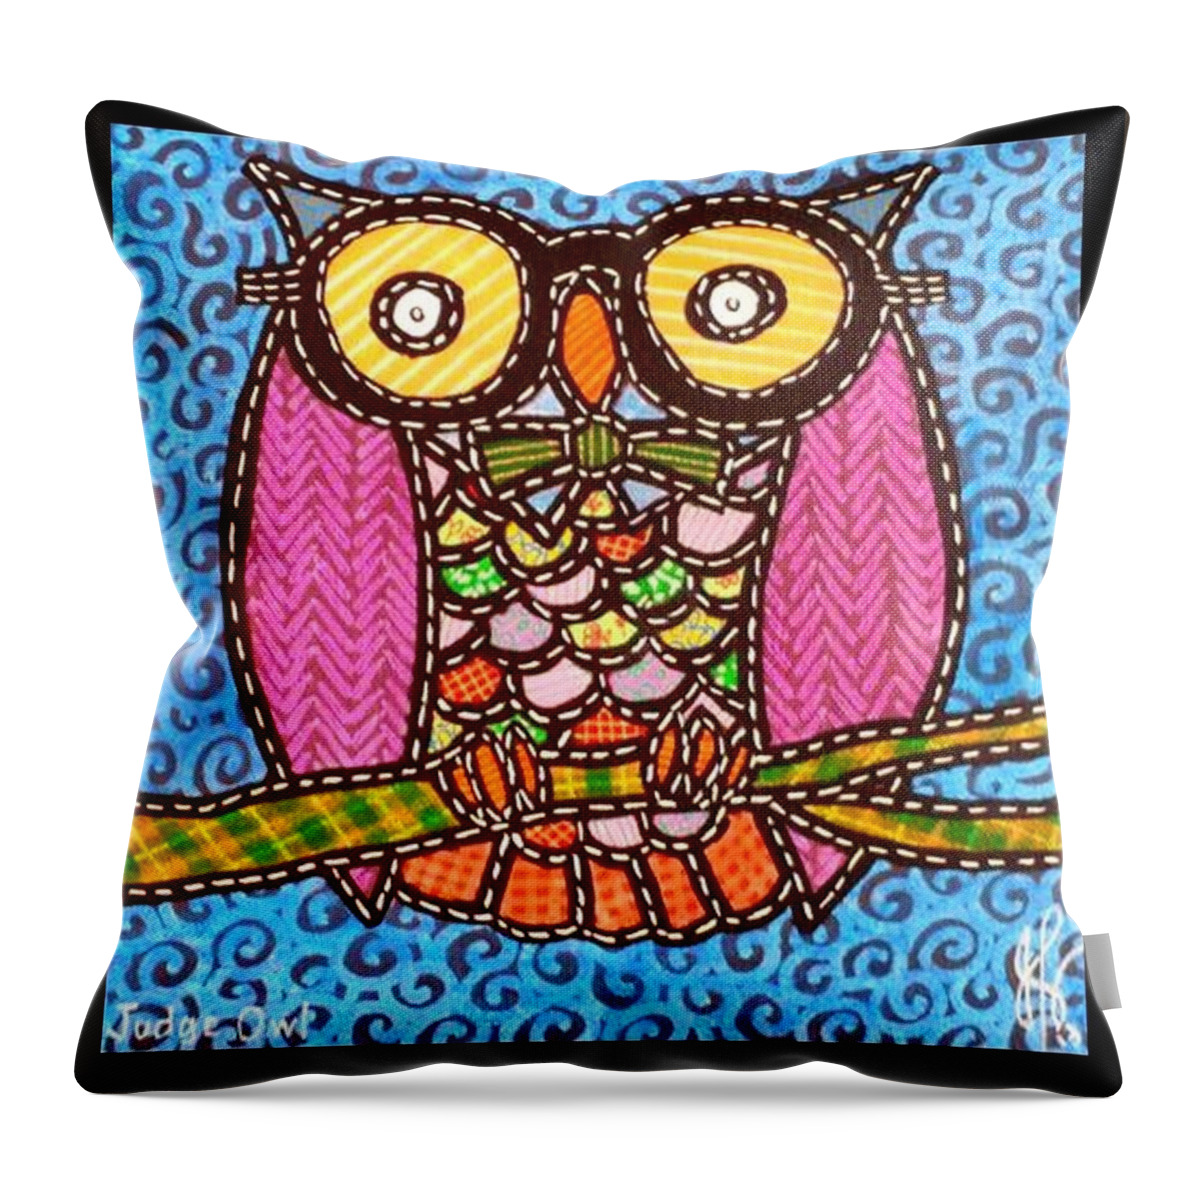 Owl Throw Pillow featuring the painting Quilted Judge Owl by Jim Harris